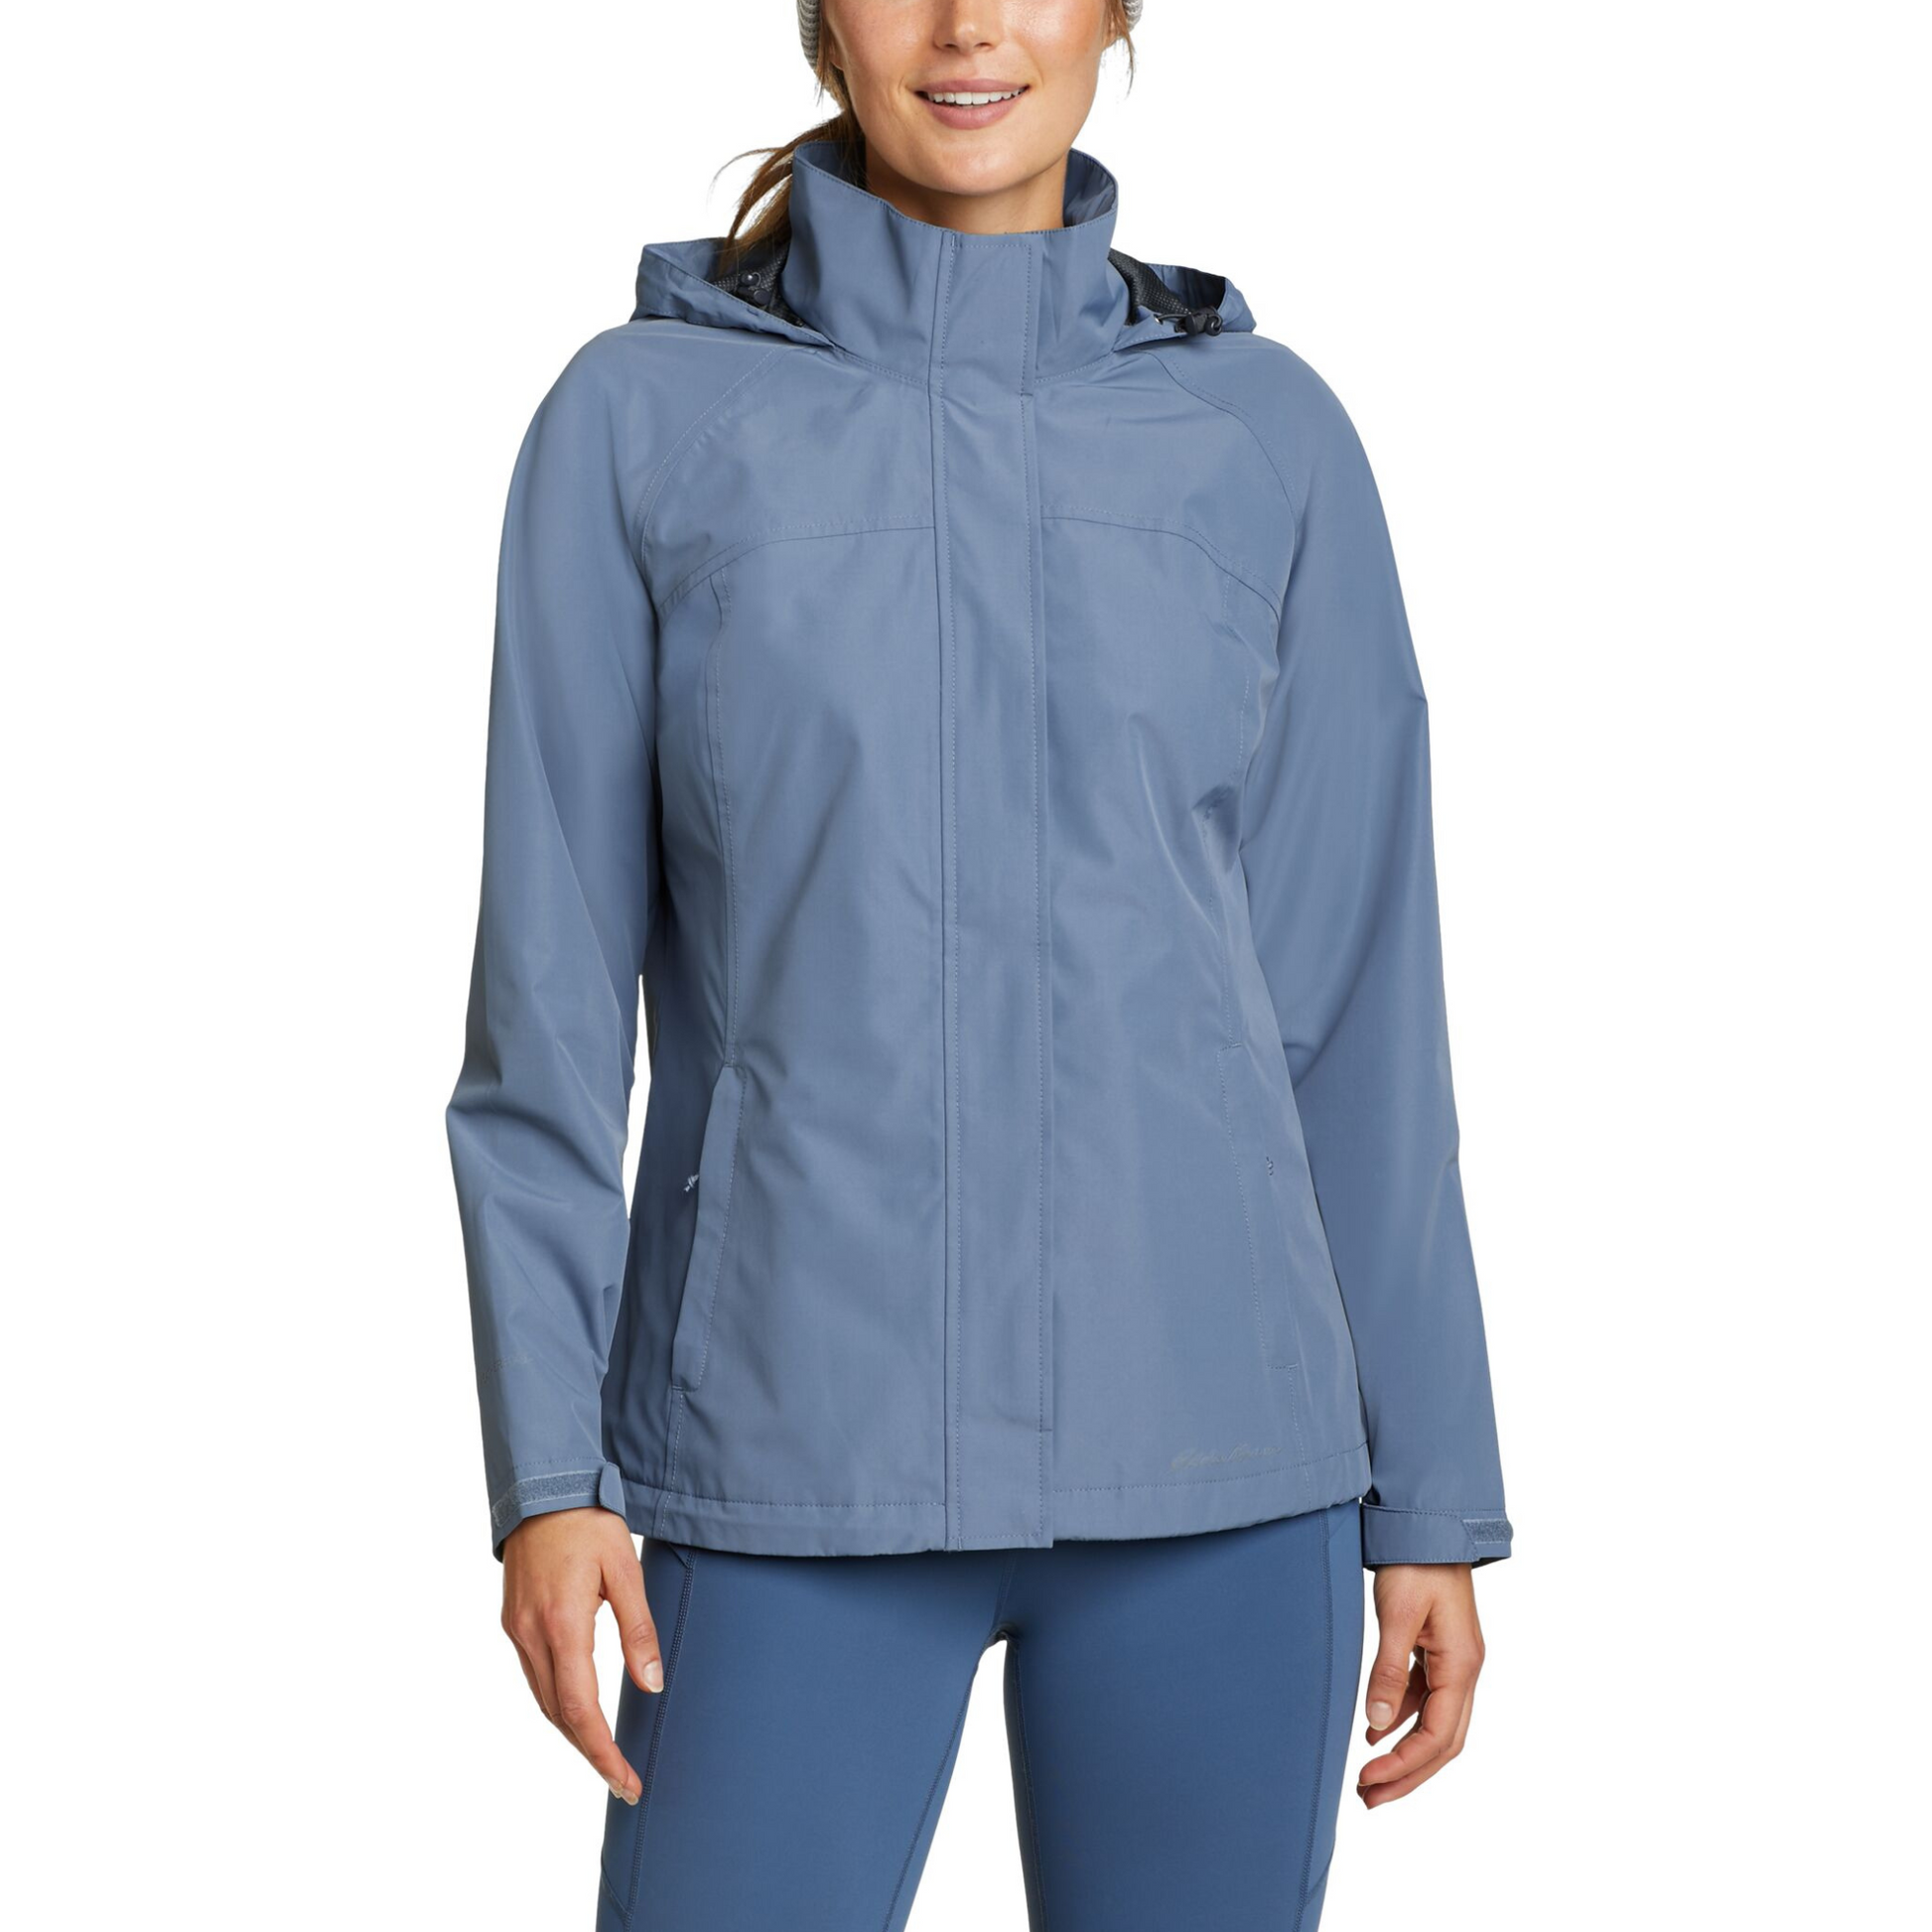 Chaqueta Rainfoil Packable Eddie Bauer Mujer Azul | Outdoor Adventure Colombia